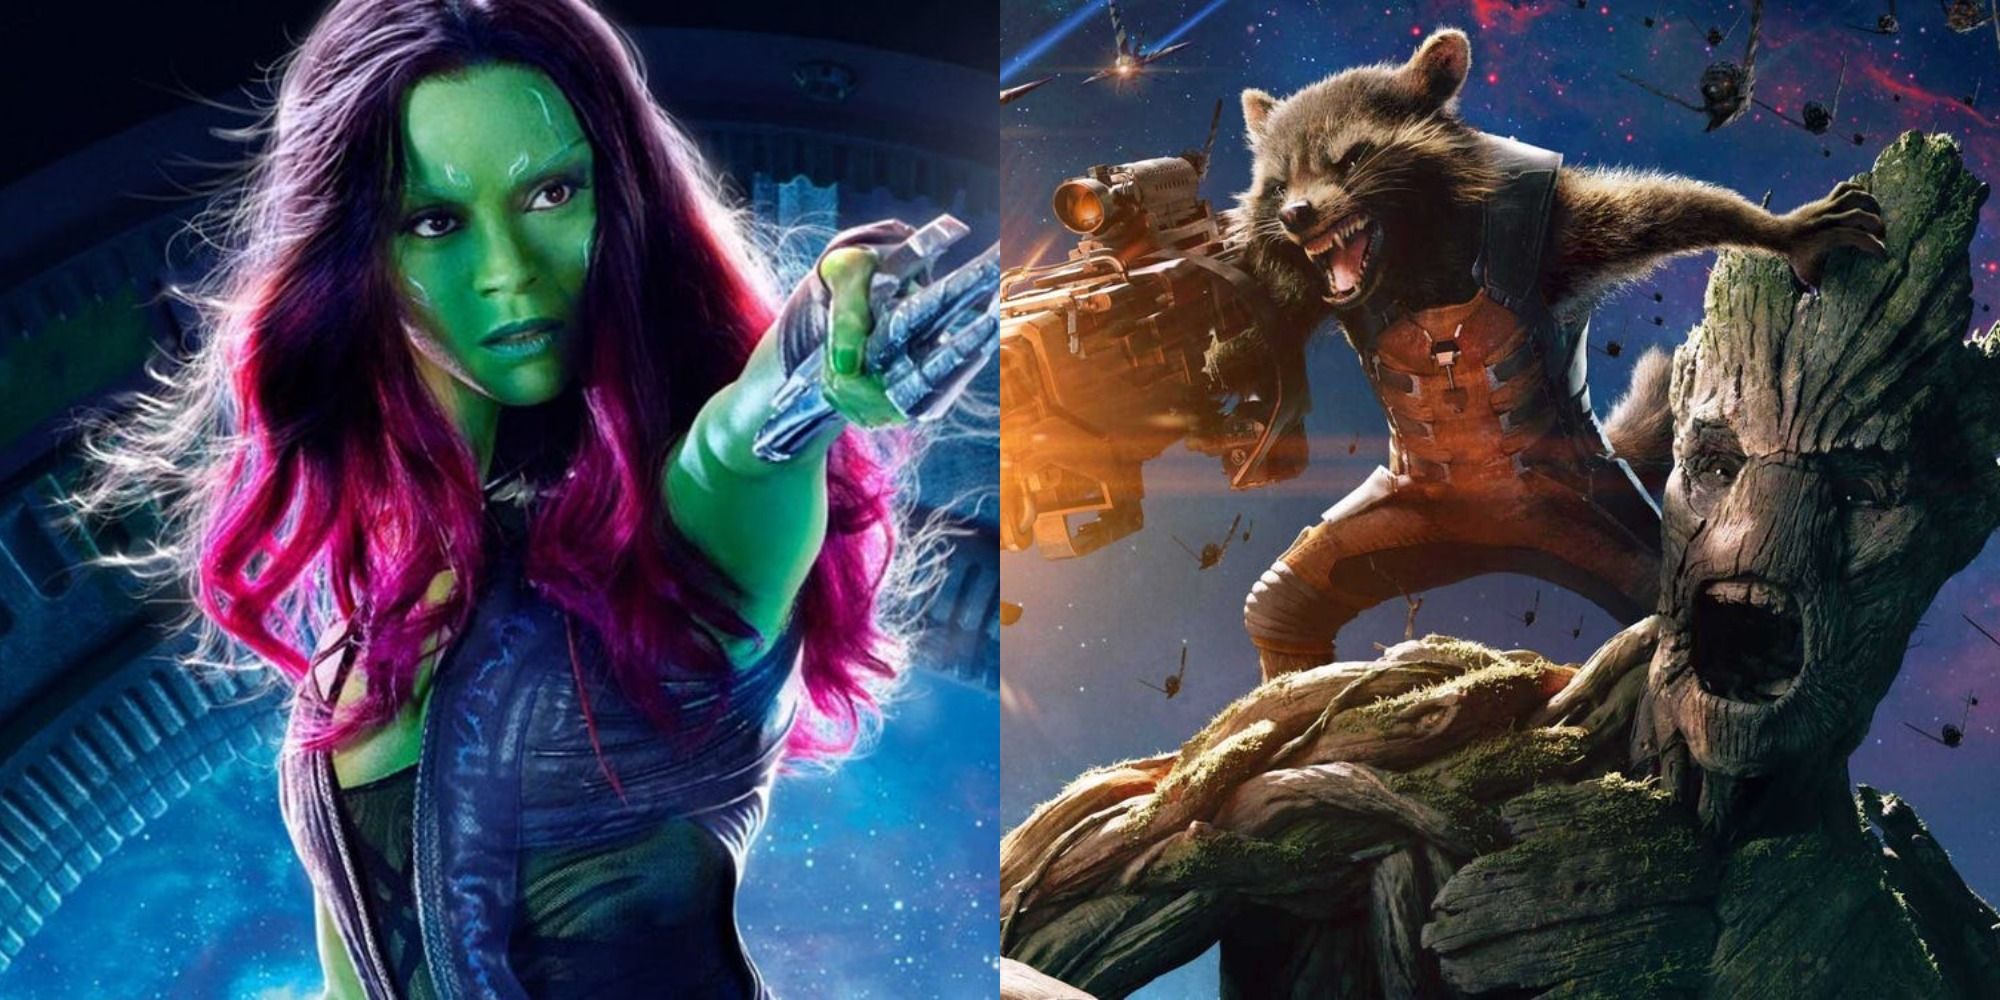 Split image showing Gamora and Rocket and Groot in Guardians of the Galaxy